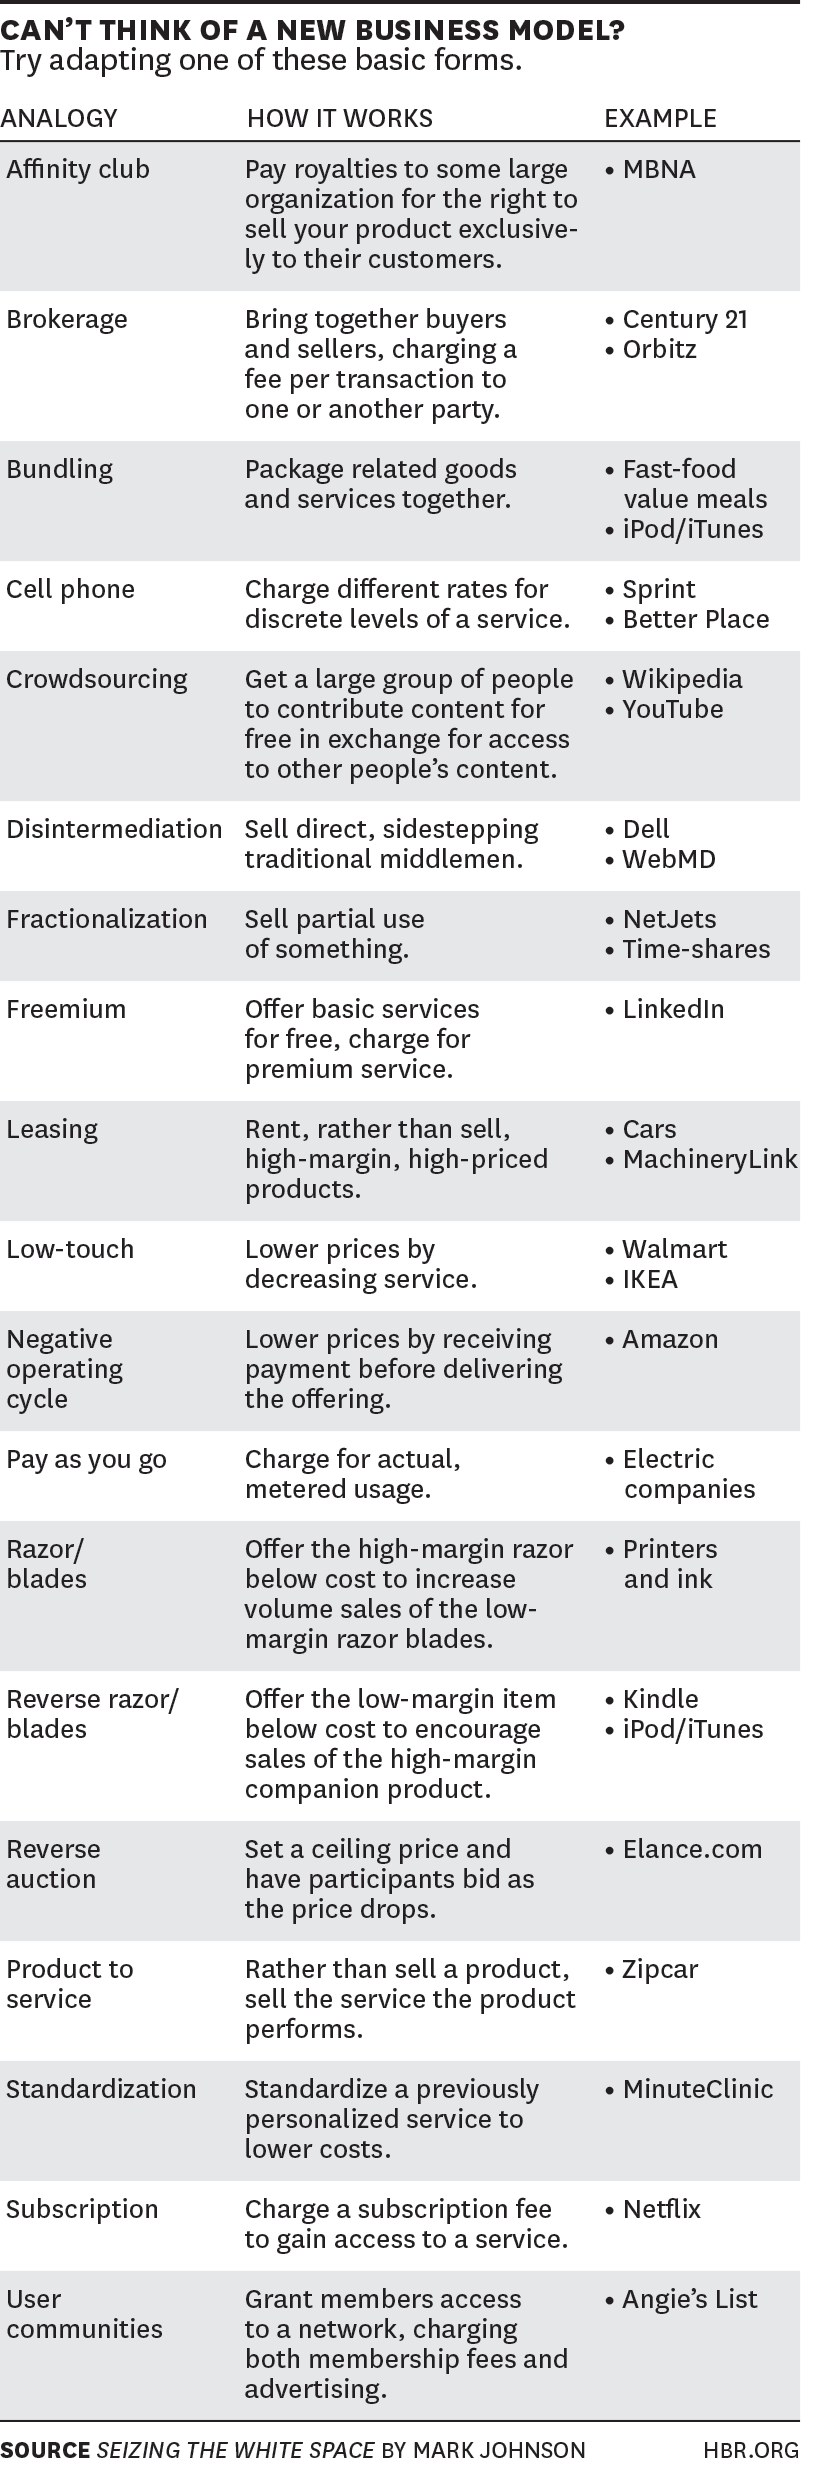 List of business models from Harvard Business School